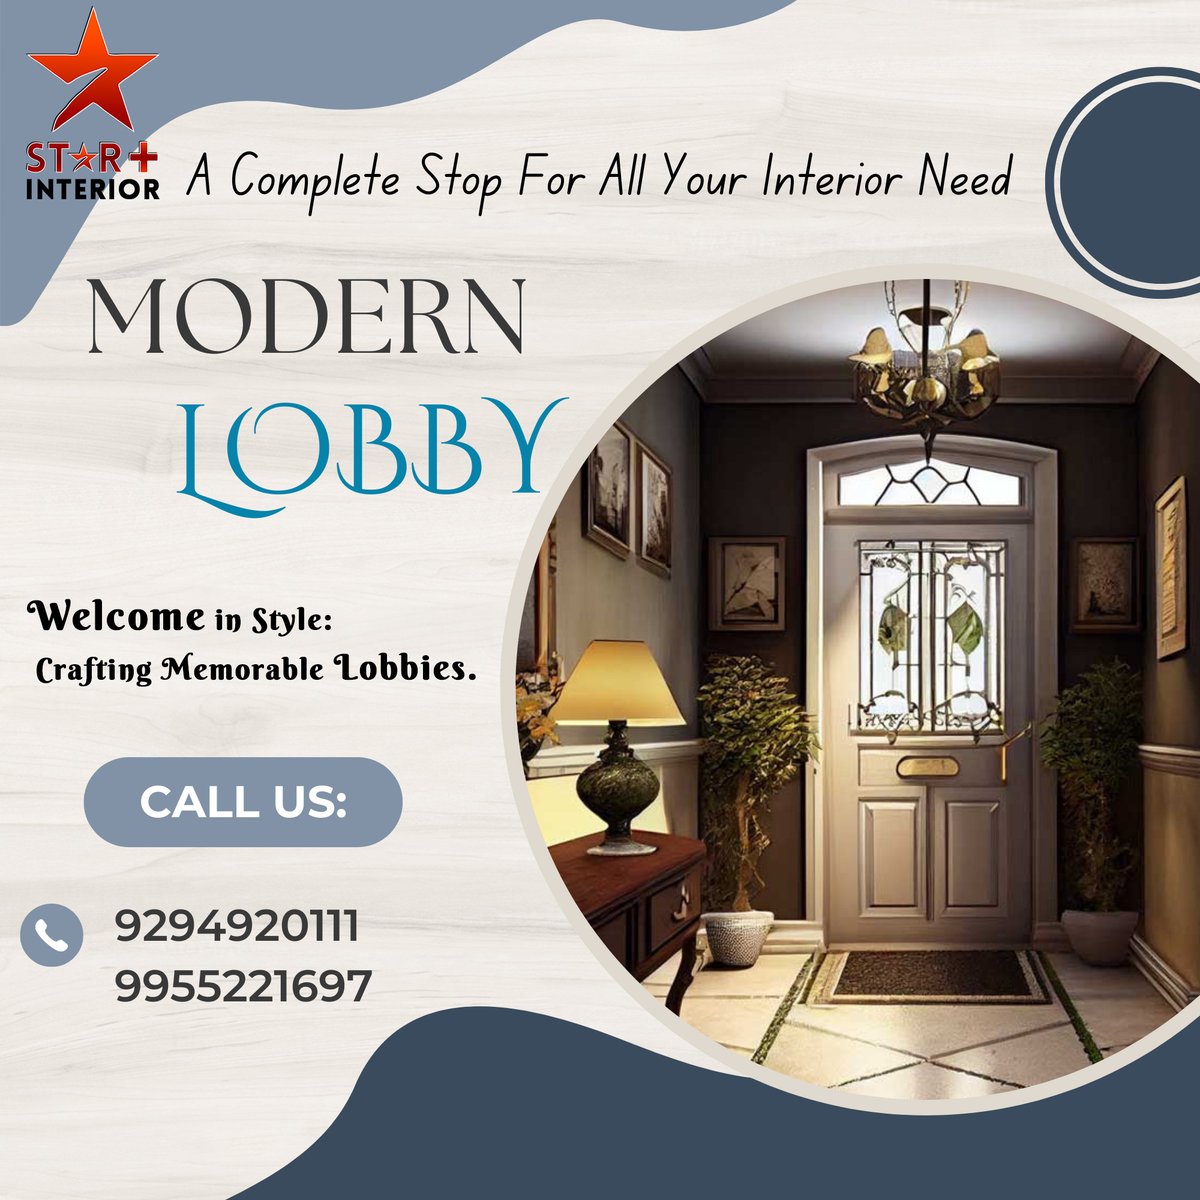 Star Plus Interior
Transforming Spaces, Creating Impressions! 
Elevate your lobby to a whole new level of sophistication with StarPlus!  
#interiordesigntrends #interiordecorating #StarPlus #LobbyLuxury #InteriorDesign #architecturedesign #homedecorideas #homestylingideas